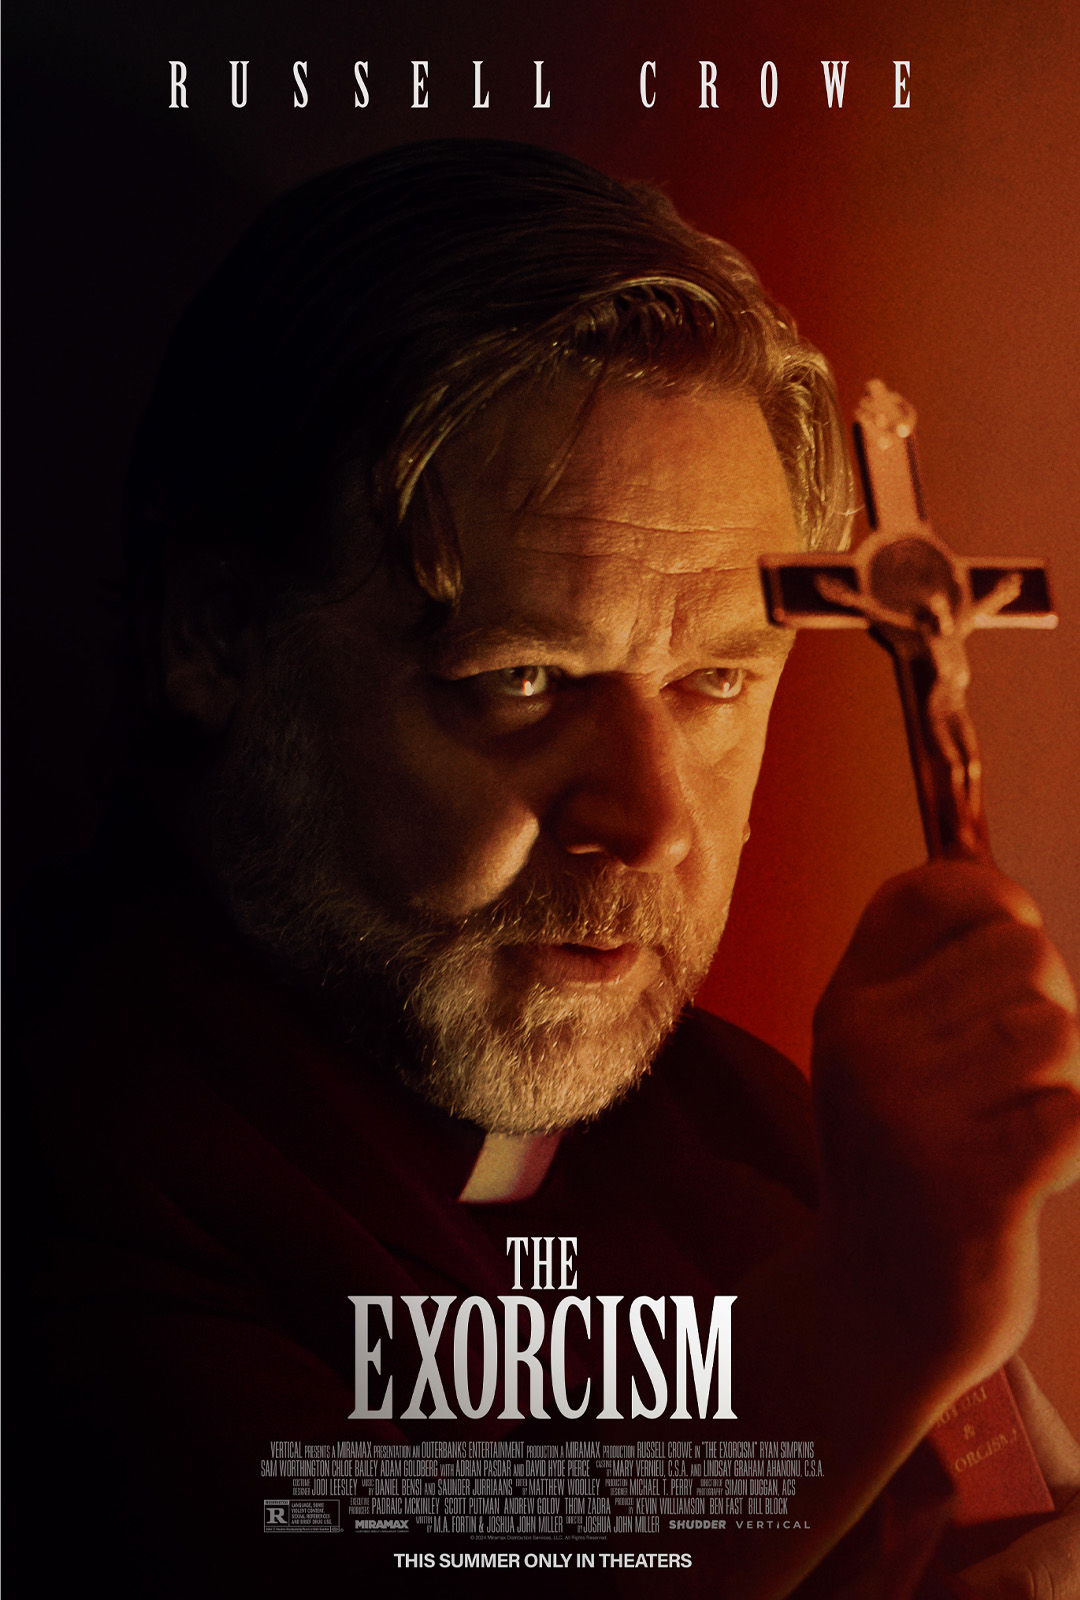 Movie Poster: The Exorcism